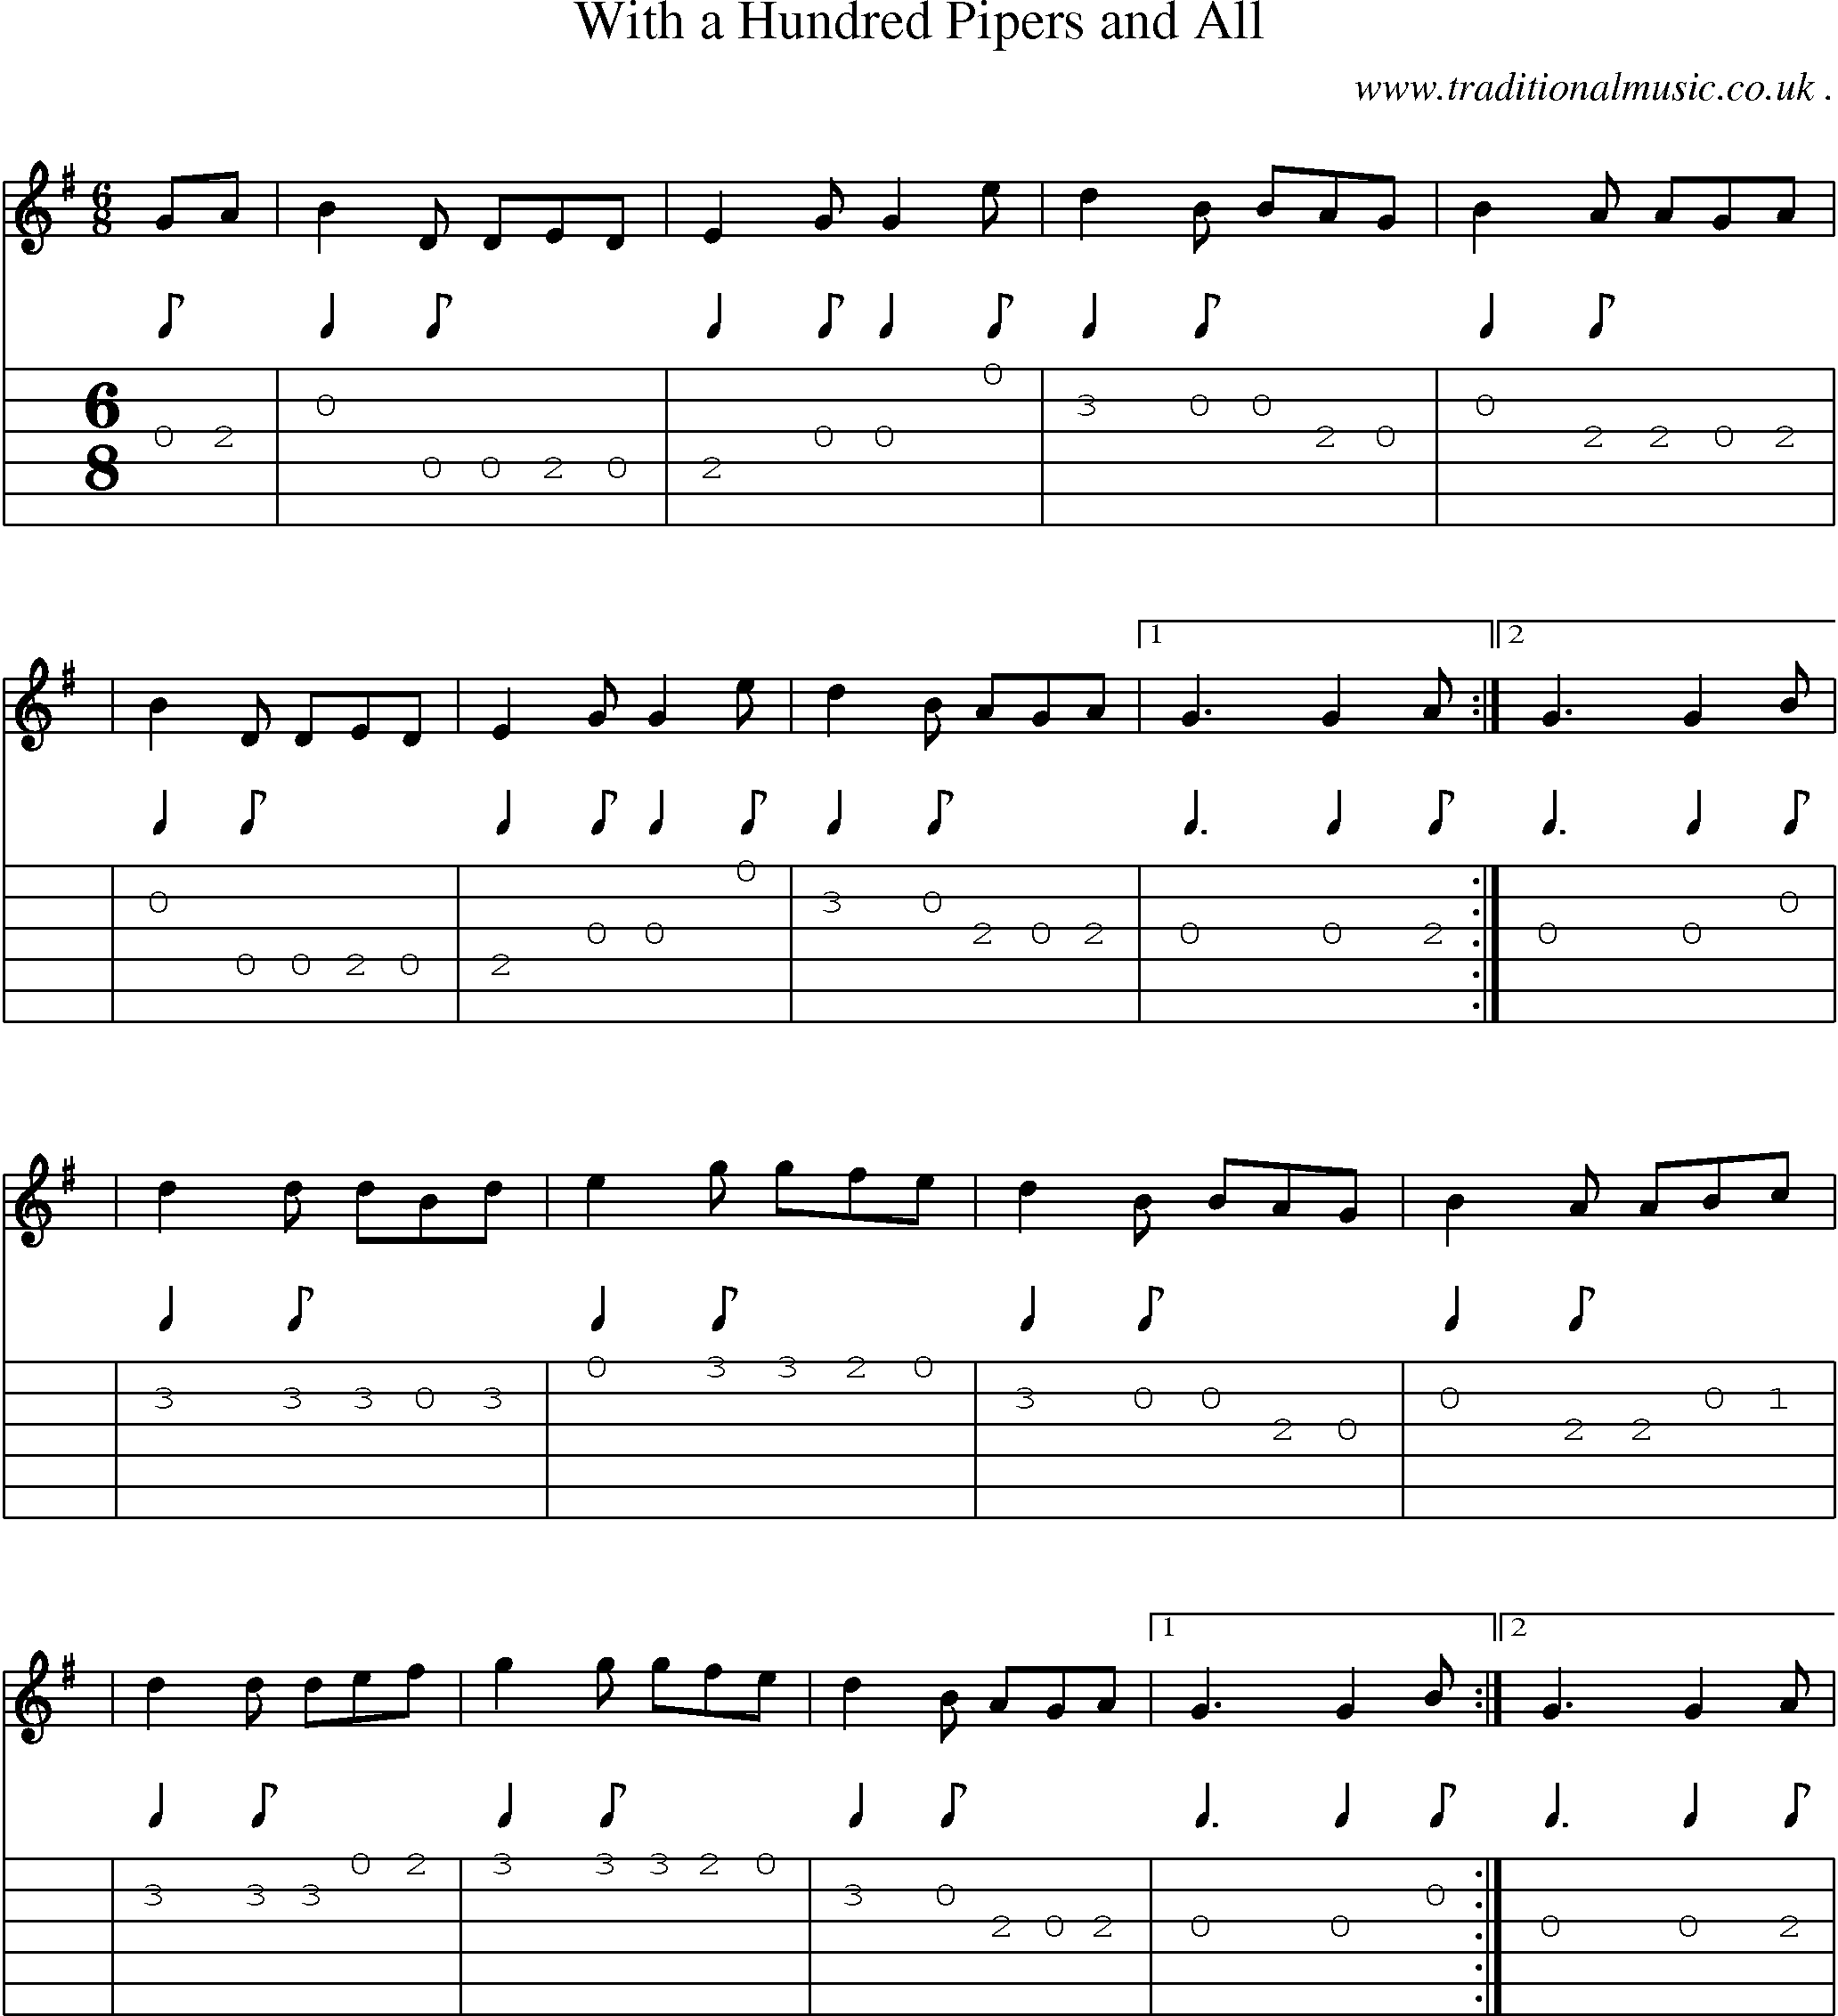 Sheet-music  score, Chords and Guitar Tabs for With A Hundred Pipers And All